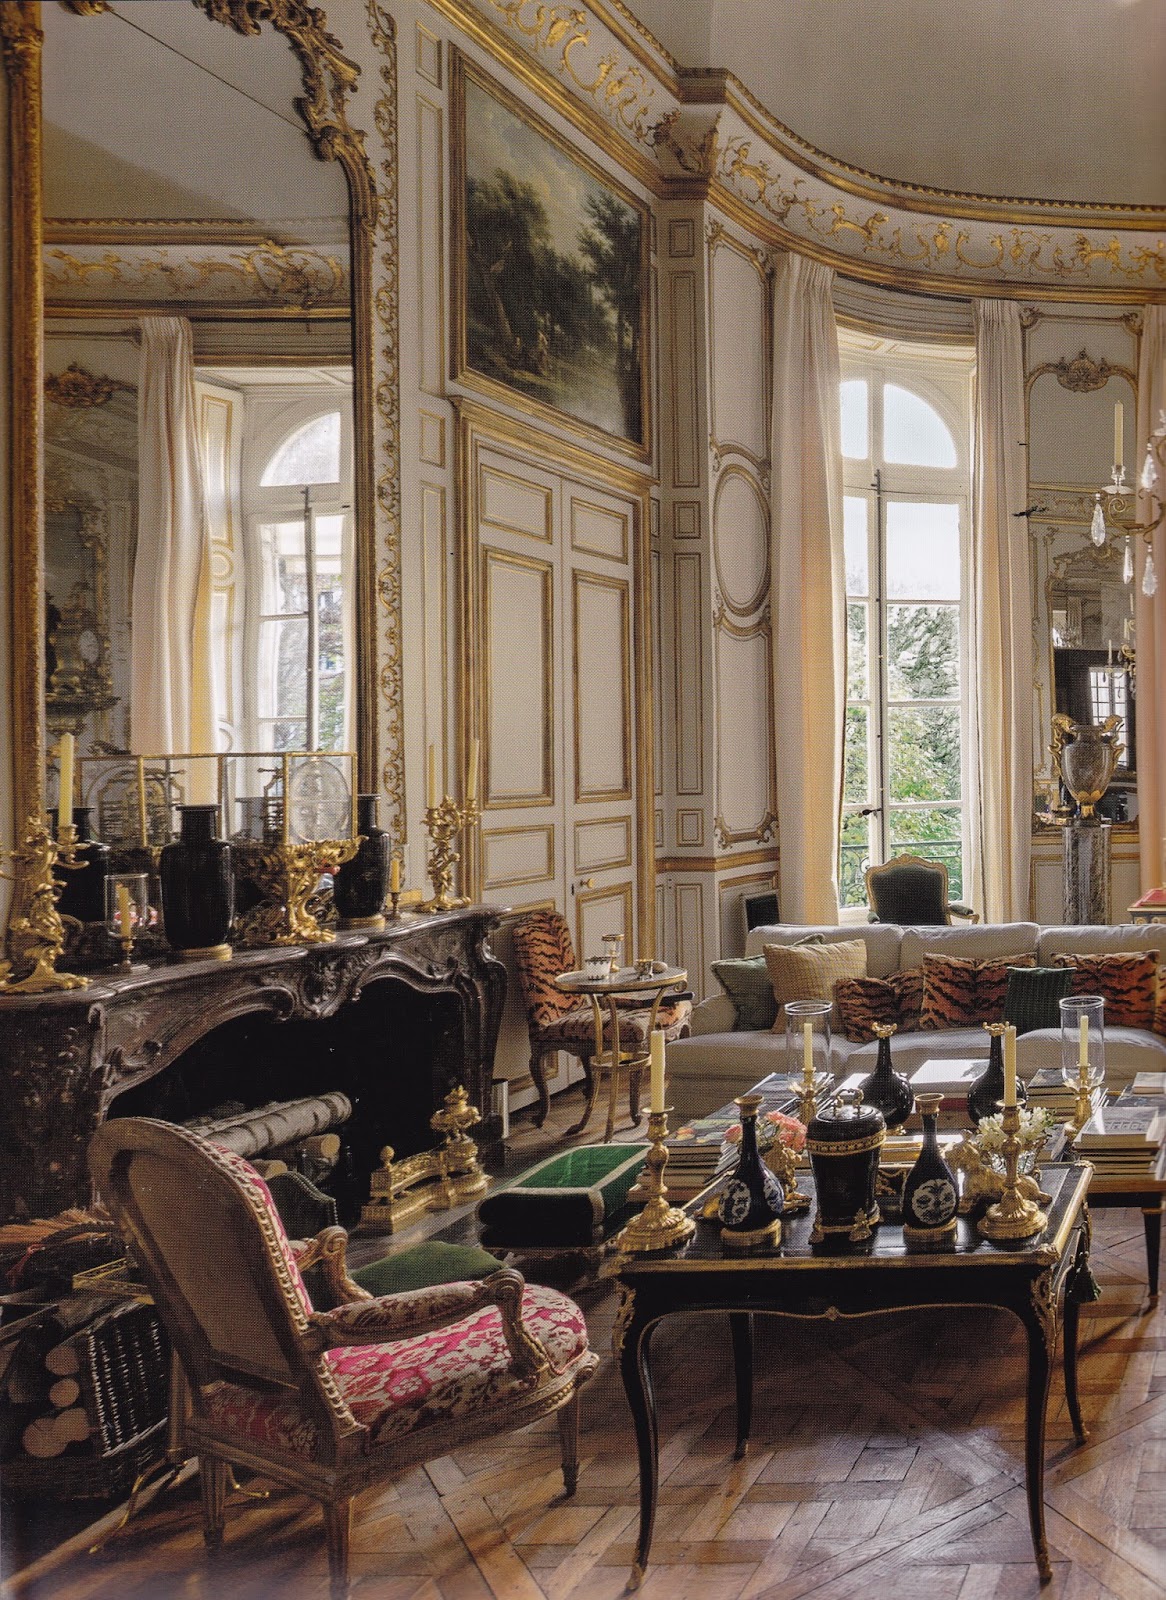 Interiors Redux | The Homes of Hubert de Givenchy in Paris & the South of France